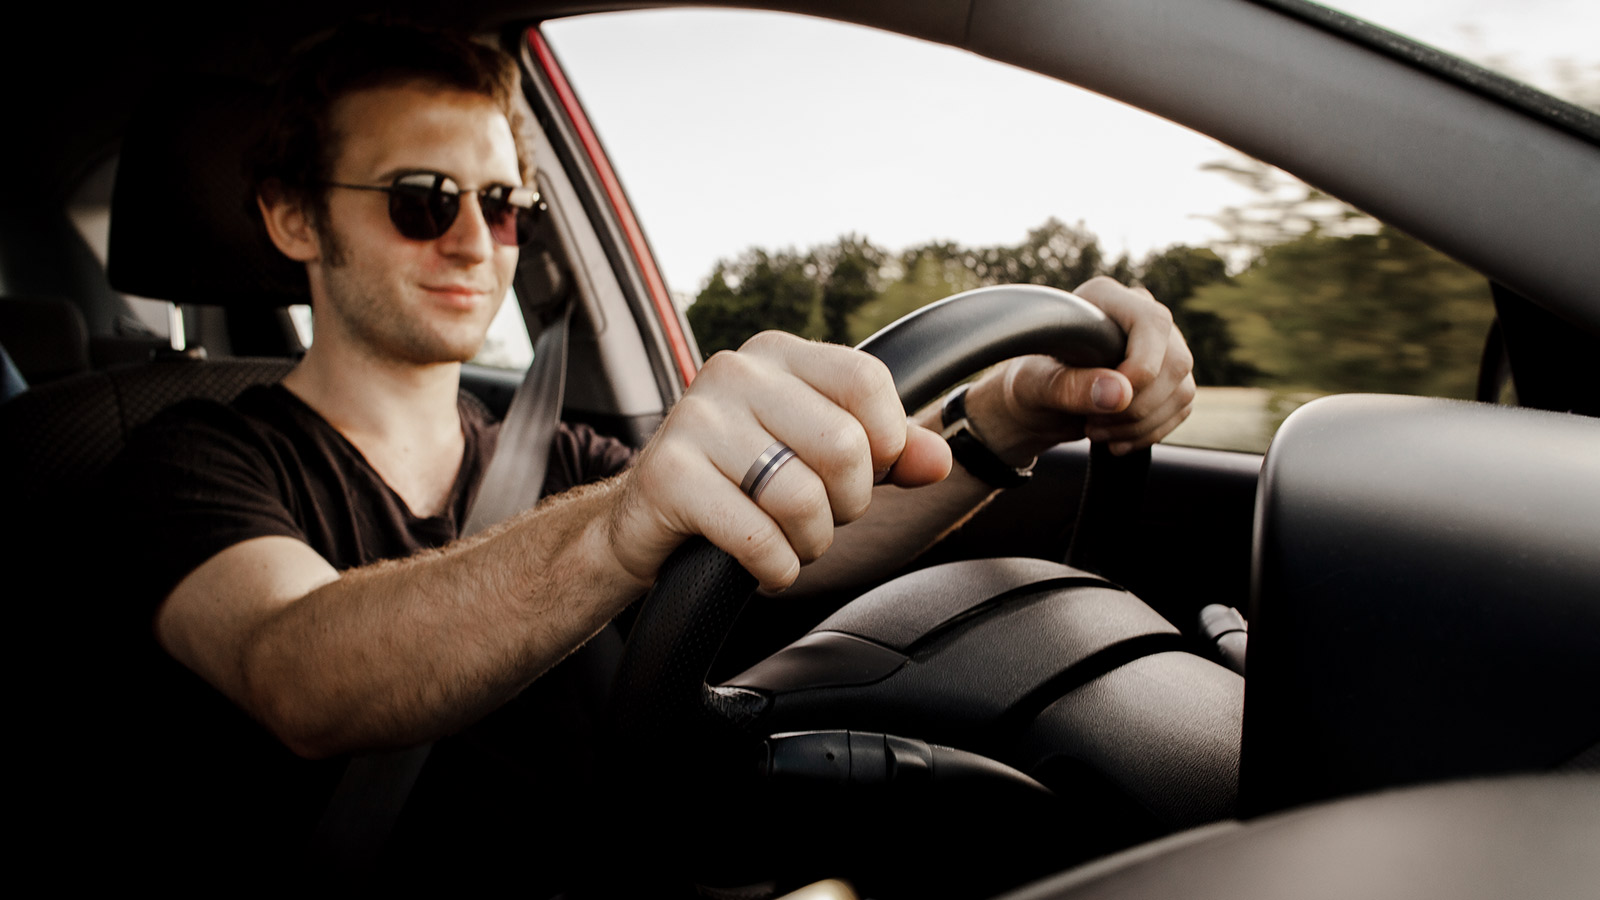 A man in dark glasses is driving a car with a titanium wedding ring on his hand